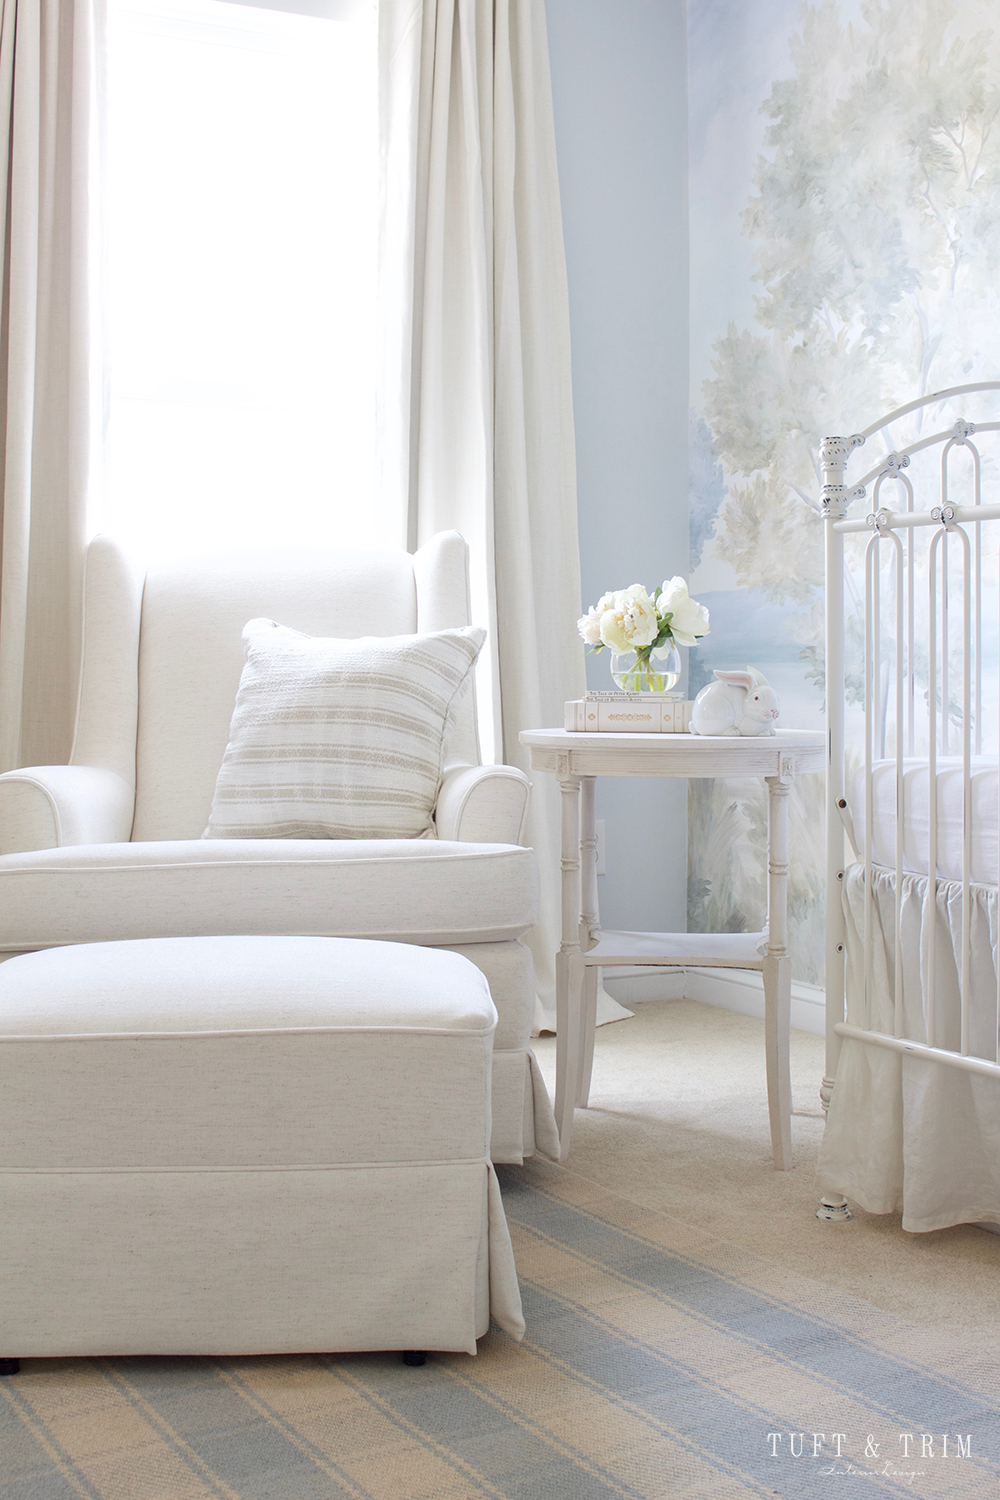 A Whimsical Nature Themed Nursery fit for a Prince. Design by Tuft & Trim Interior Design